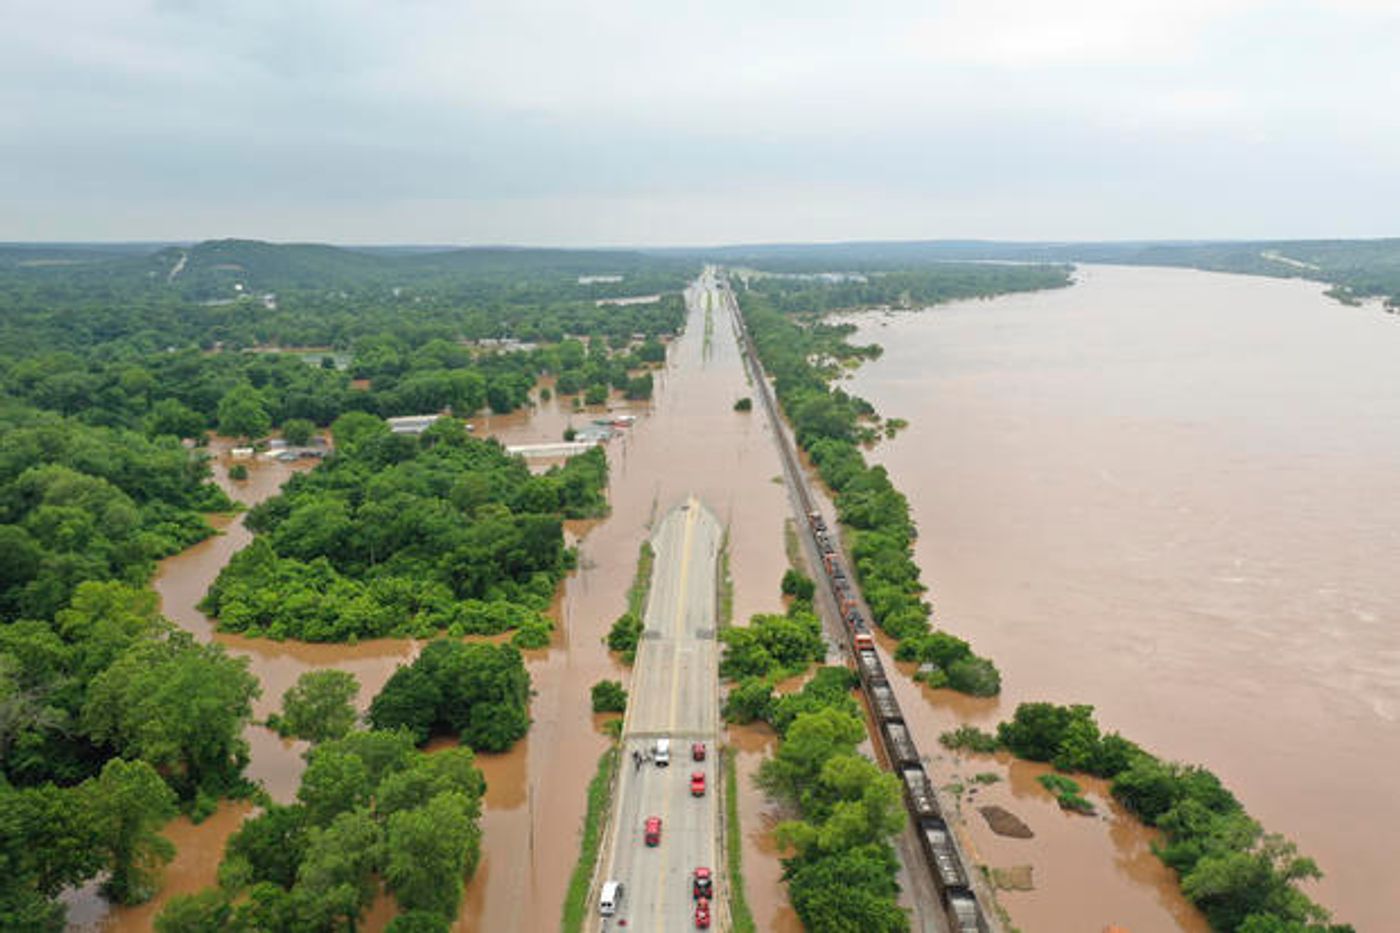 The Arkansas River flooding has affected thousands of homes. Photo: CBS News